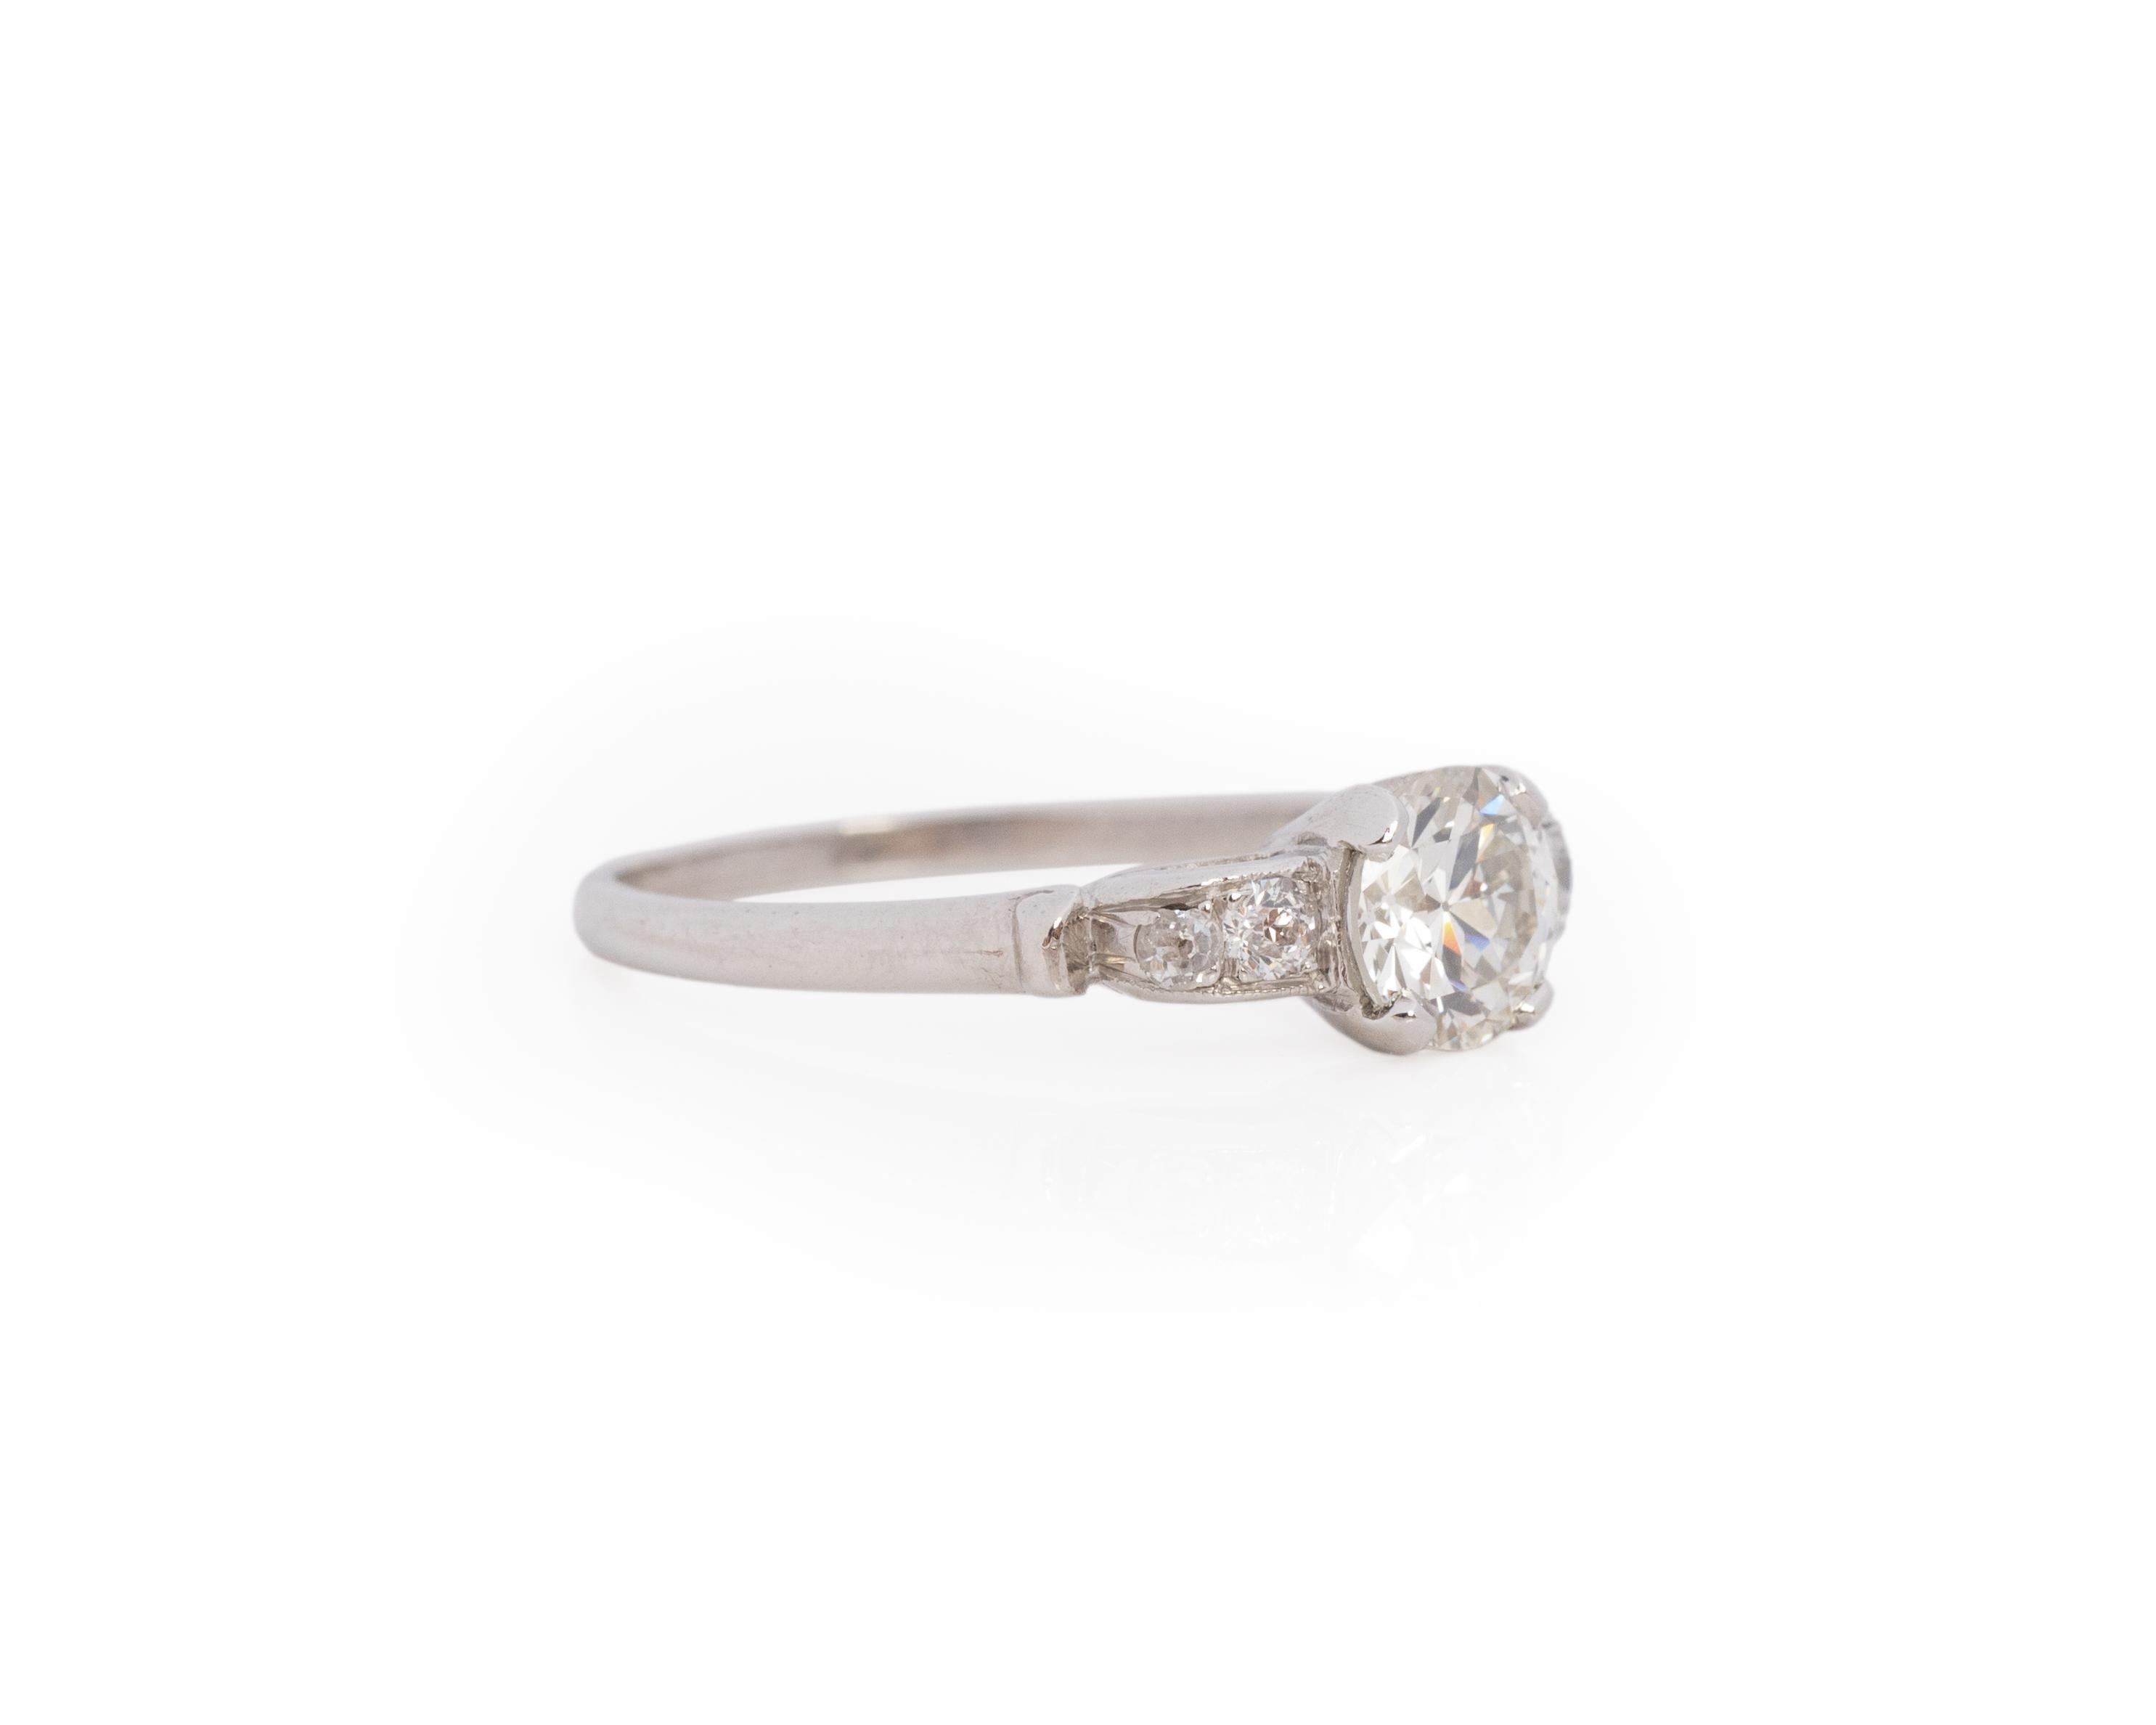 Item Details:
Ring Size: 7.5
Metal Type: Platinum [Hallmarked, and Tested]
Weight: 4.0 grams

Center Diamond Details:

GIA Report#:2235121866
Weight: .91ct total weight
Cut: Old European brilliant
Color: K
Clarity: VS2
Type: Natural

Finger to Top